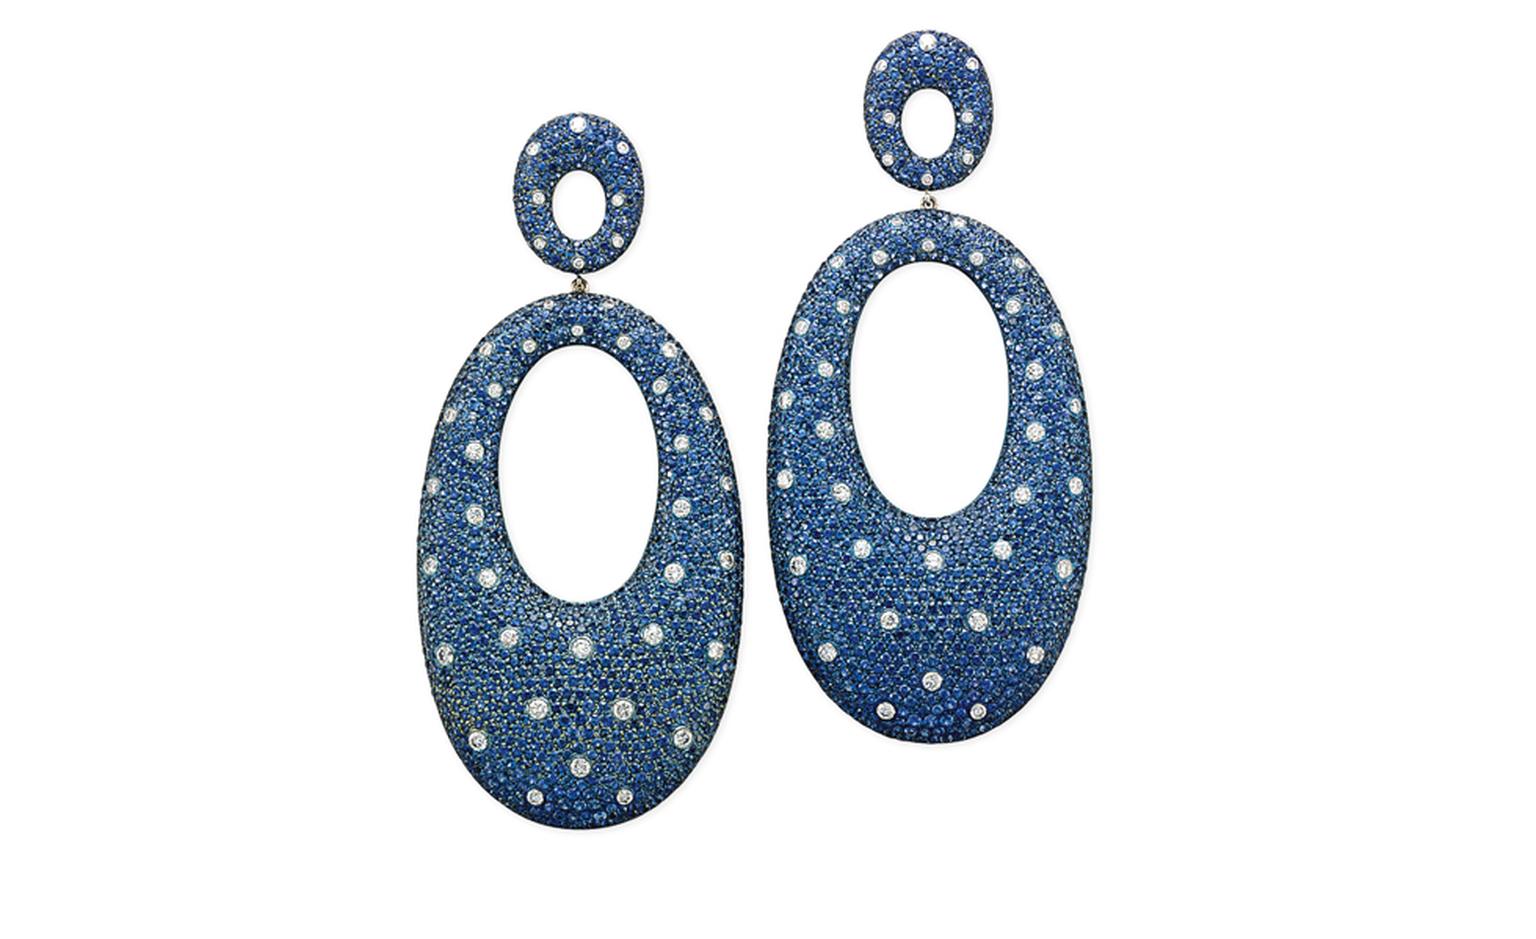 Lot 28. A pair of sapphire, diamond and titanium ear pendants. Each ear pendant designed as an oval titanium hoop mounted with pavé-set circular-shaped sapphires interspersed with brilliant-cut diamond collets of 'polka dot' motif suspended from...